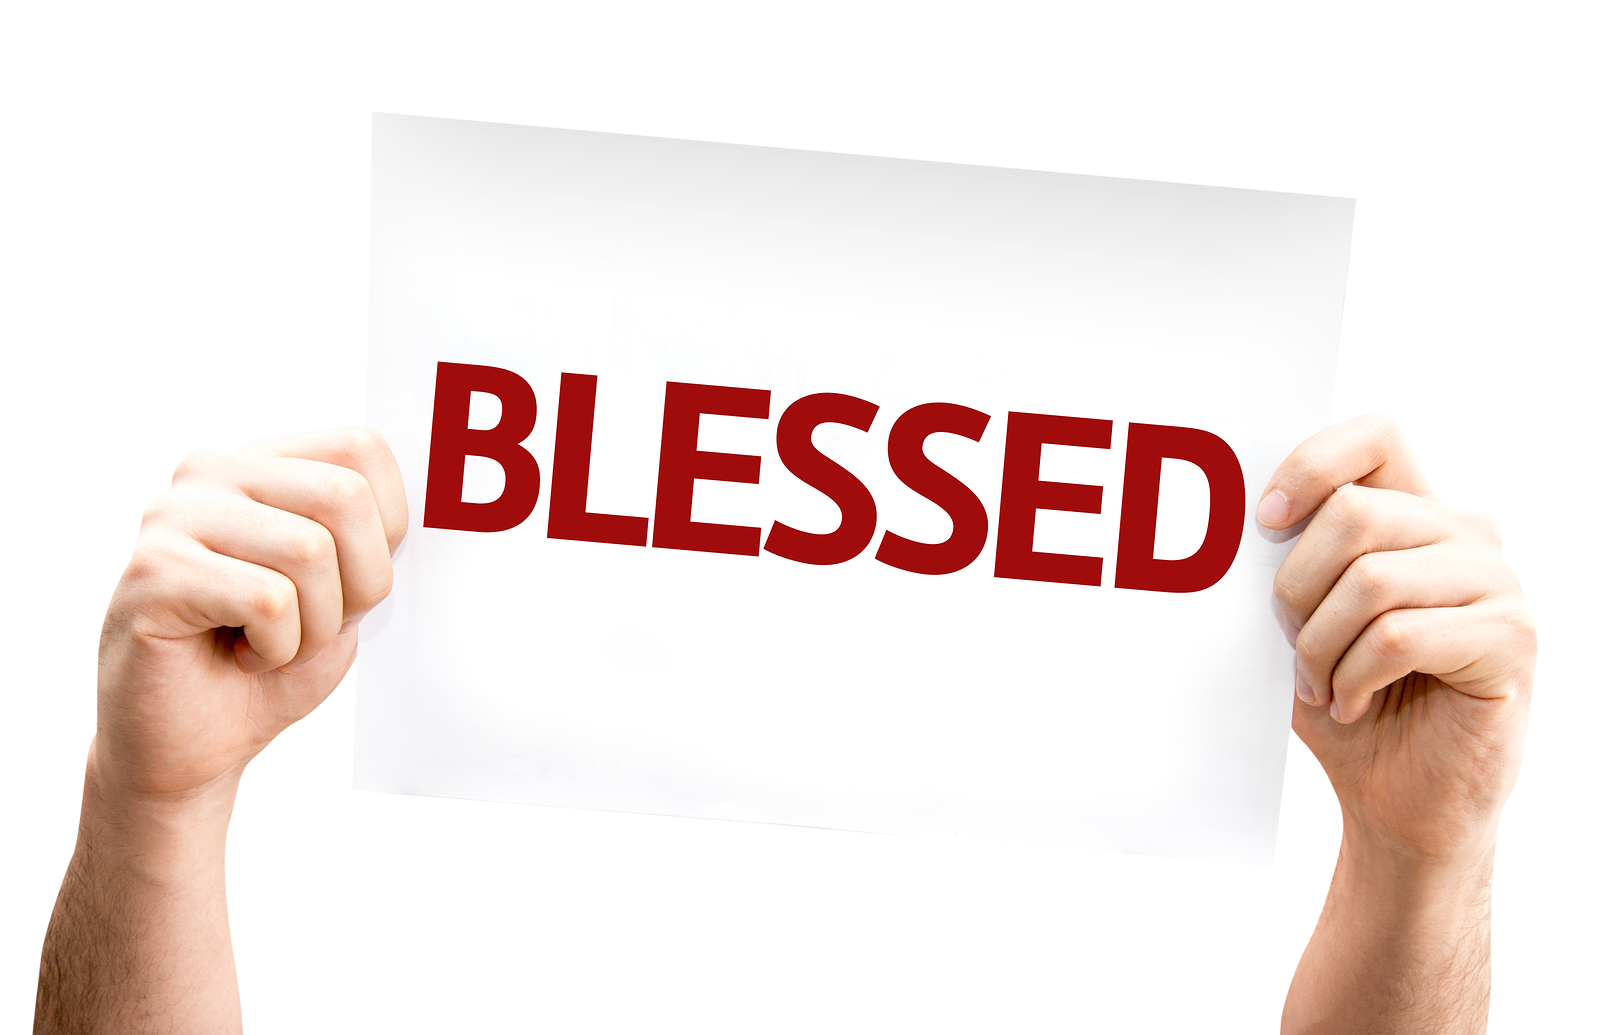 Blessed card isolated on white background